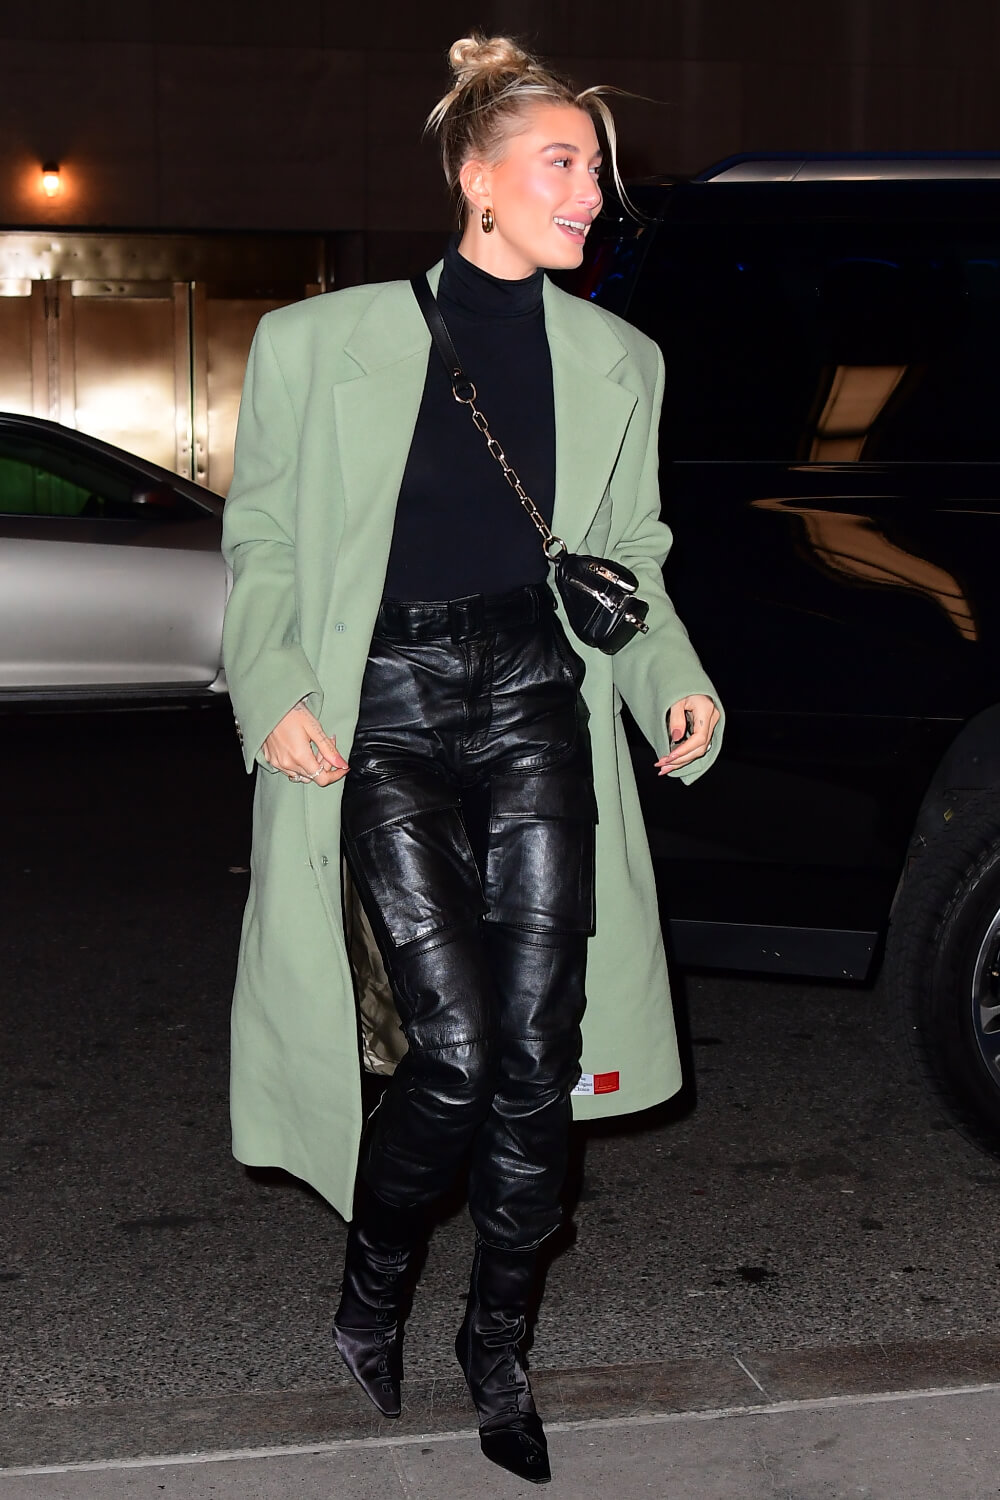 Hailey Bieber arrives at Saturday Night Live